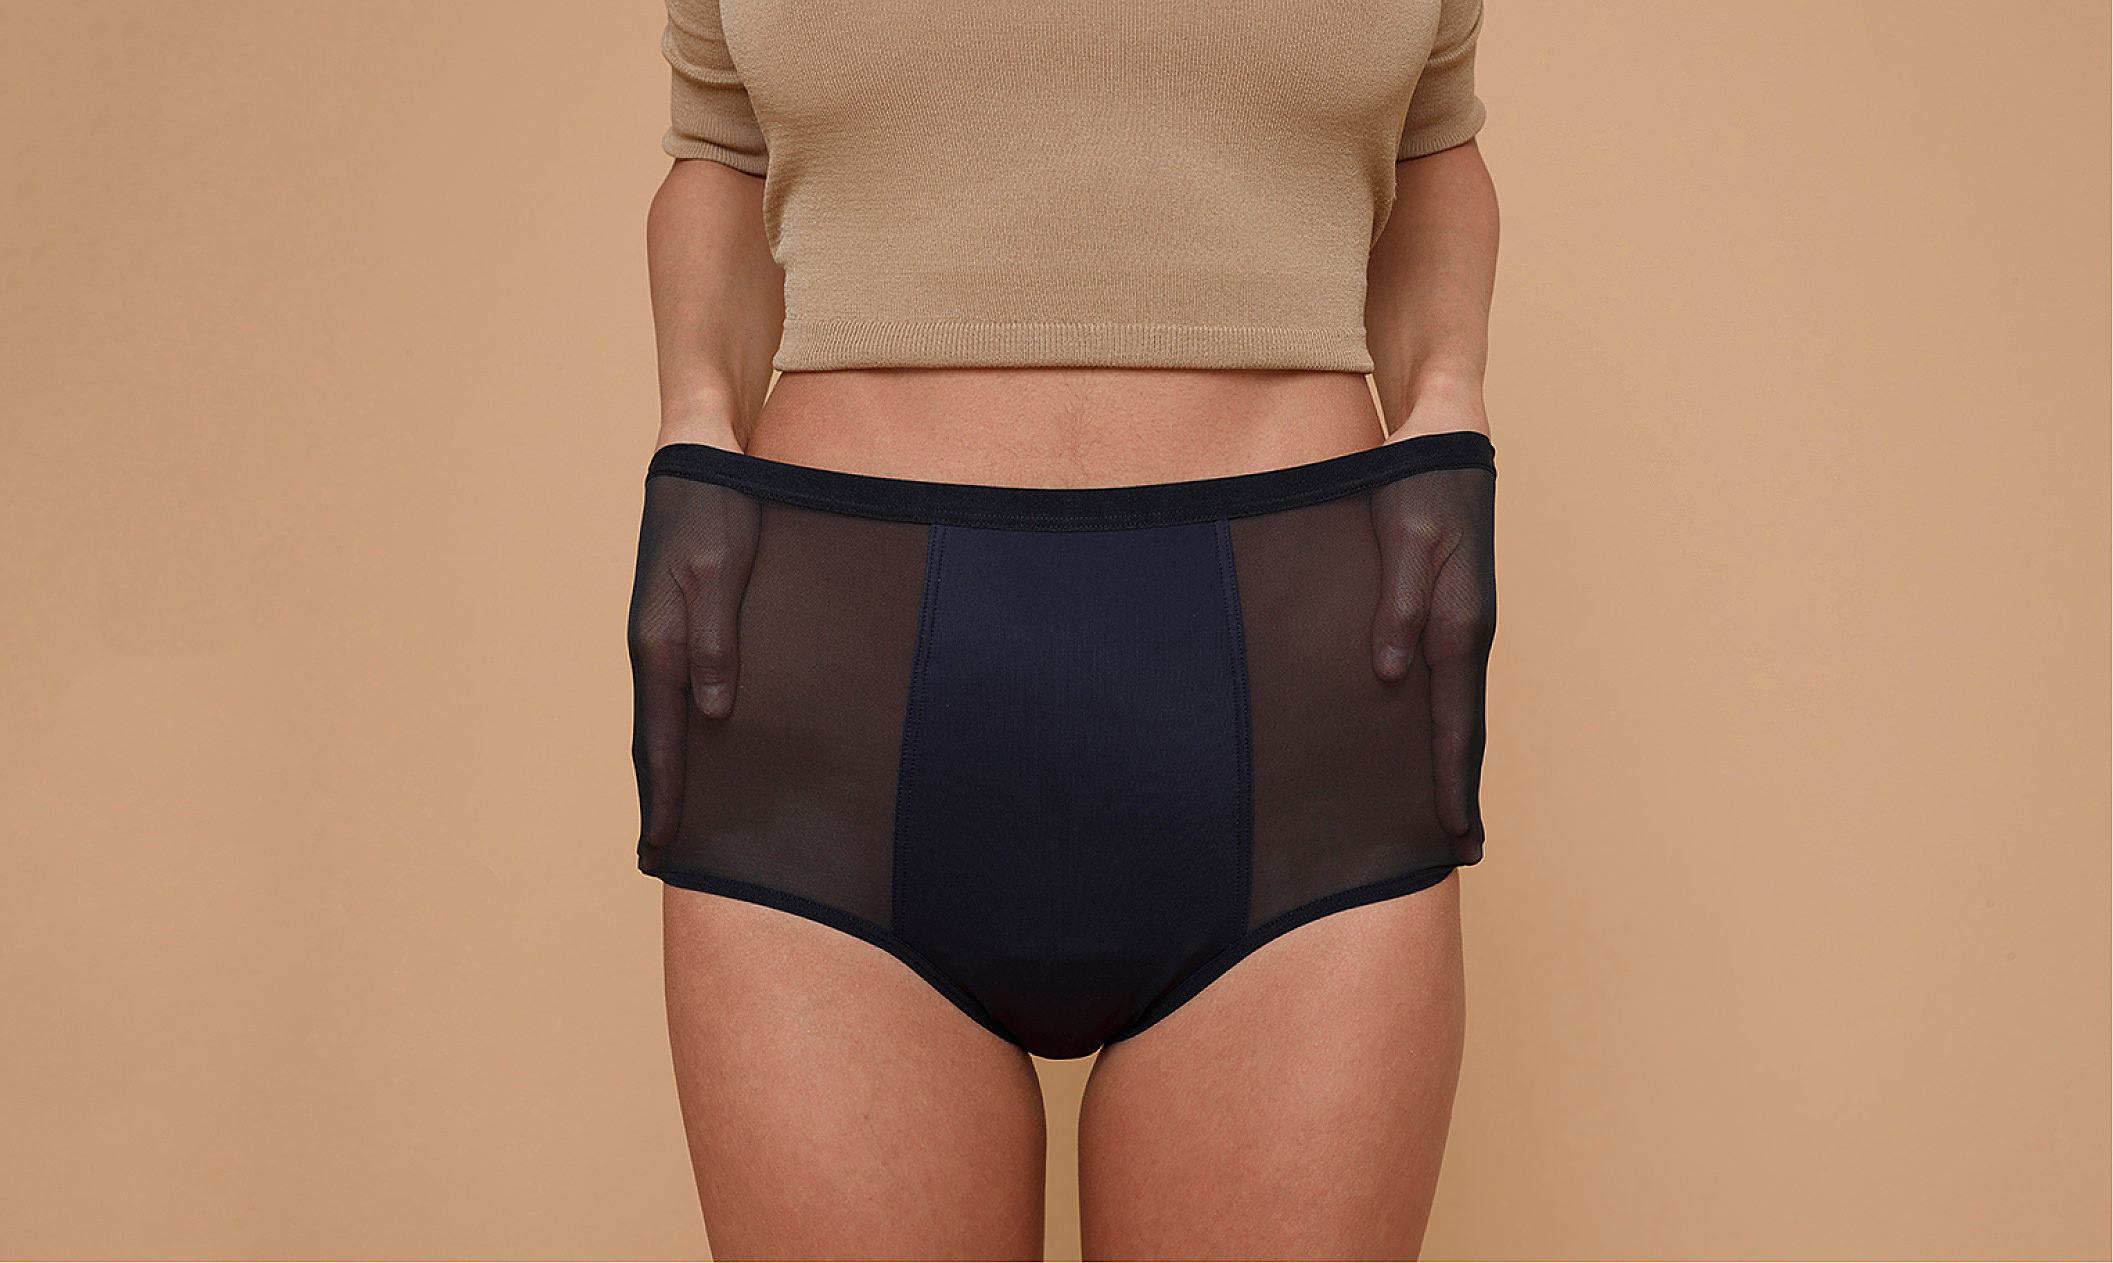 THINX REVIEW - THE PERIOD PANTIES THAT YOU SHOULD TRY - Belle